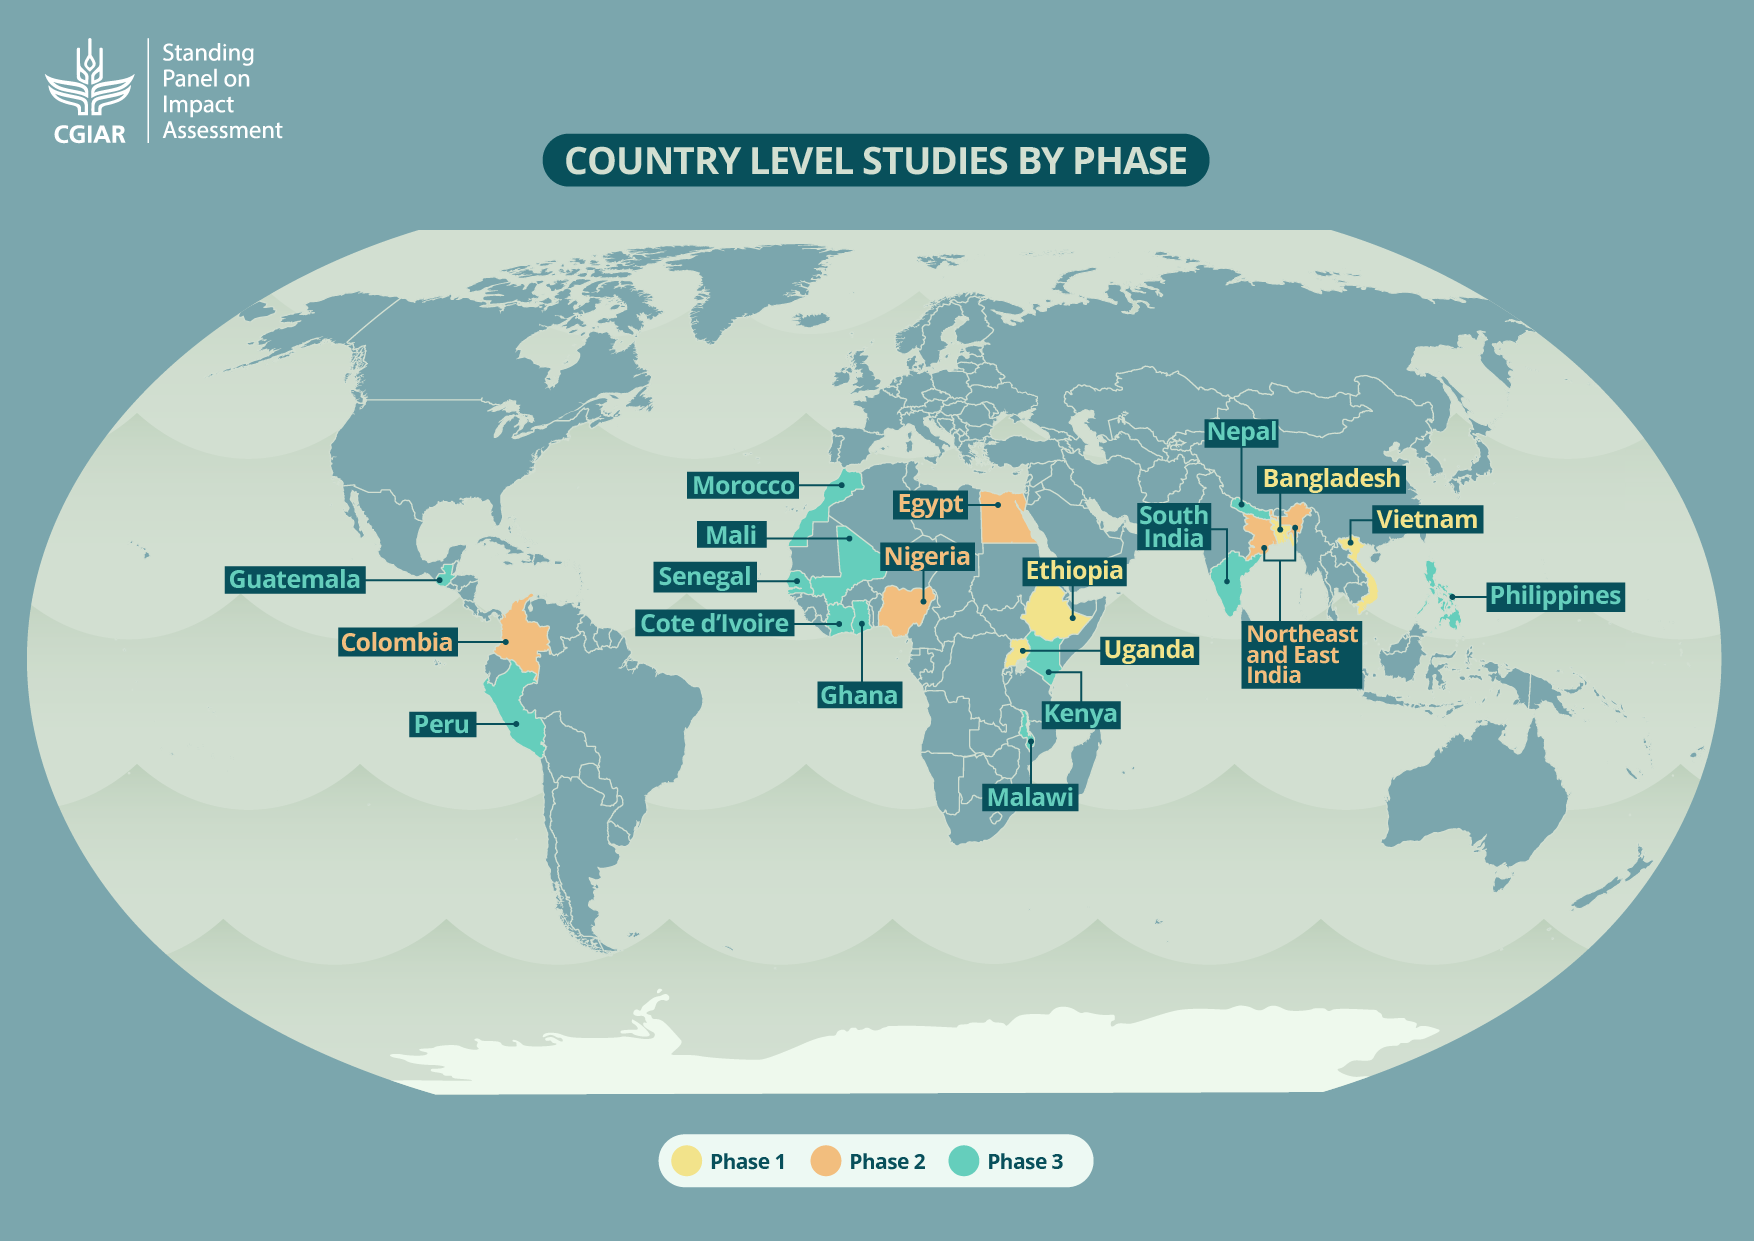 Country-level Studies by Phase